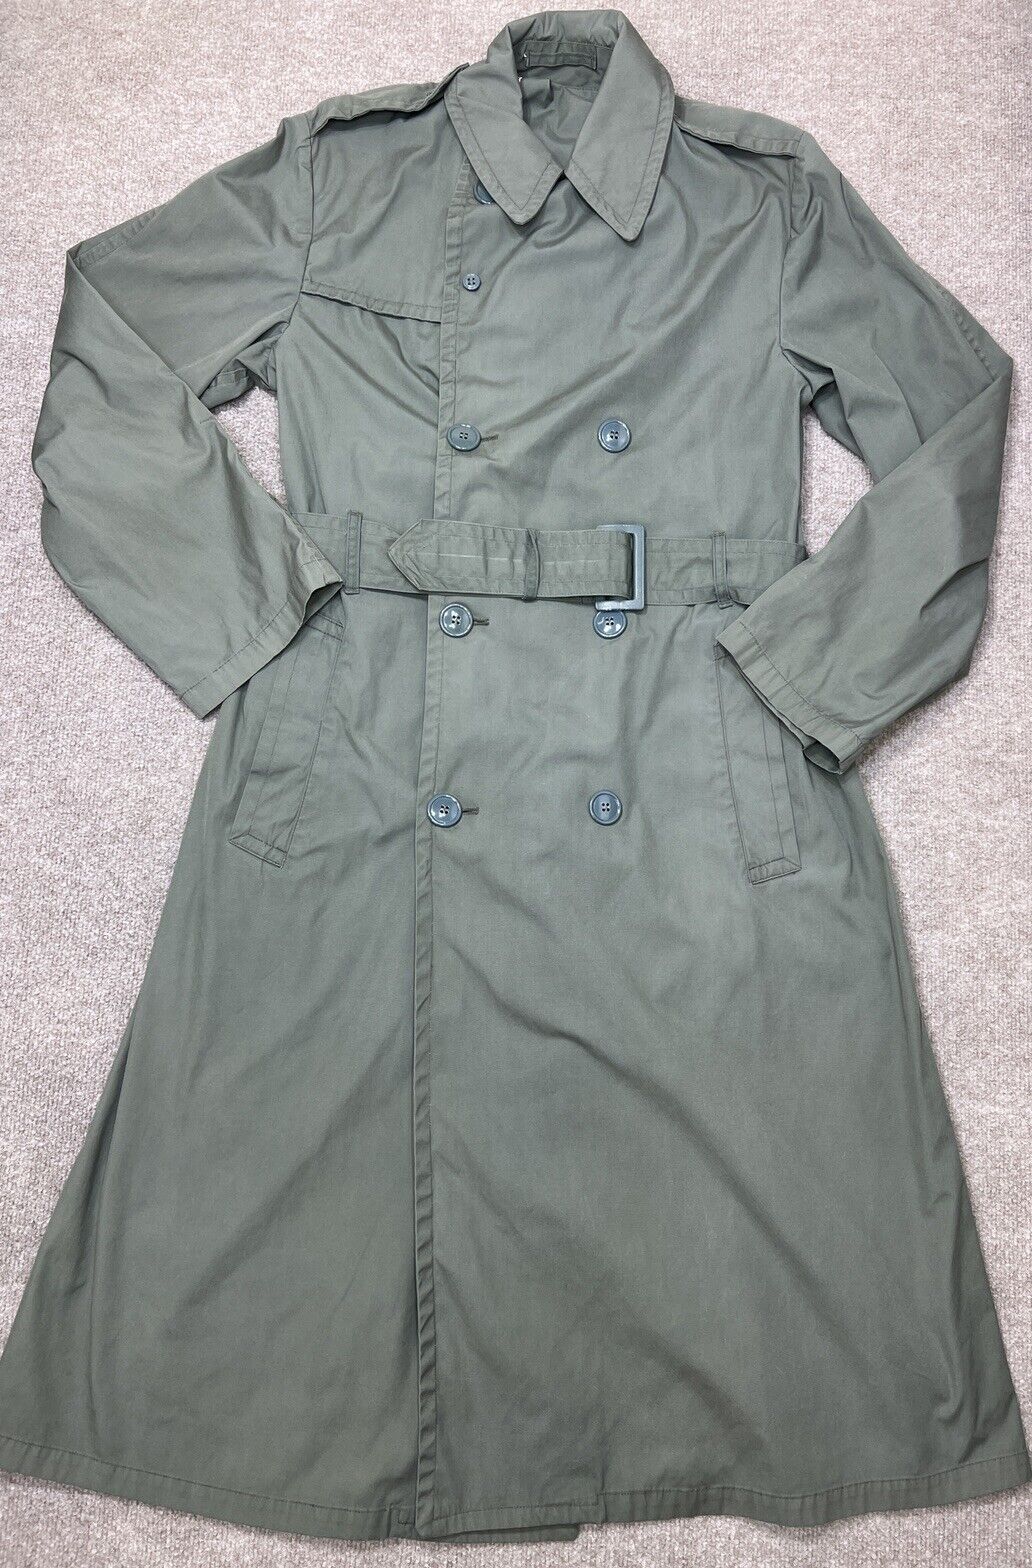 VINTAGE Army Raincoat Mens Size 36 Vietnam 1968 Green Quarpel Belted Long Trench